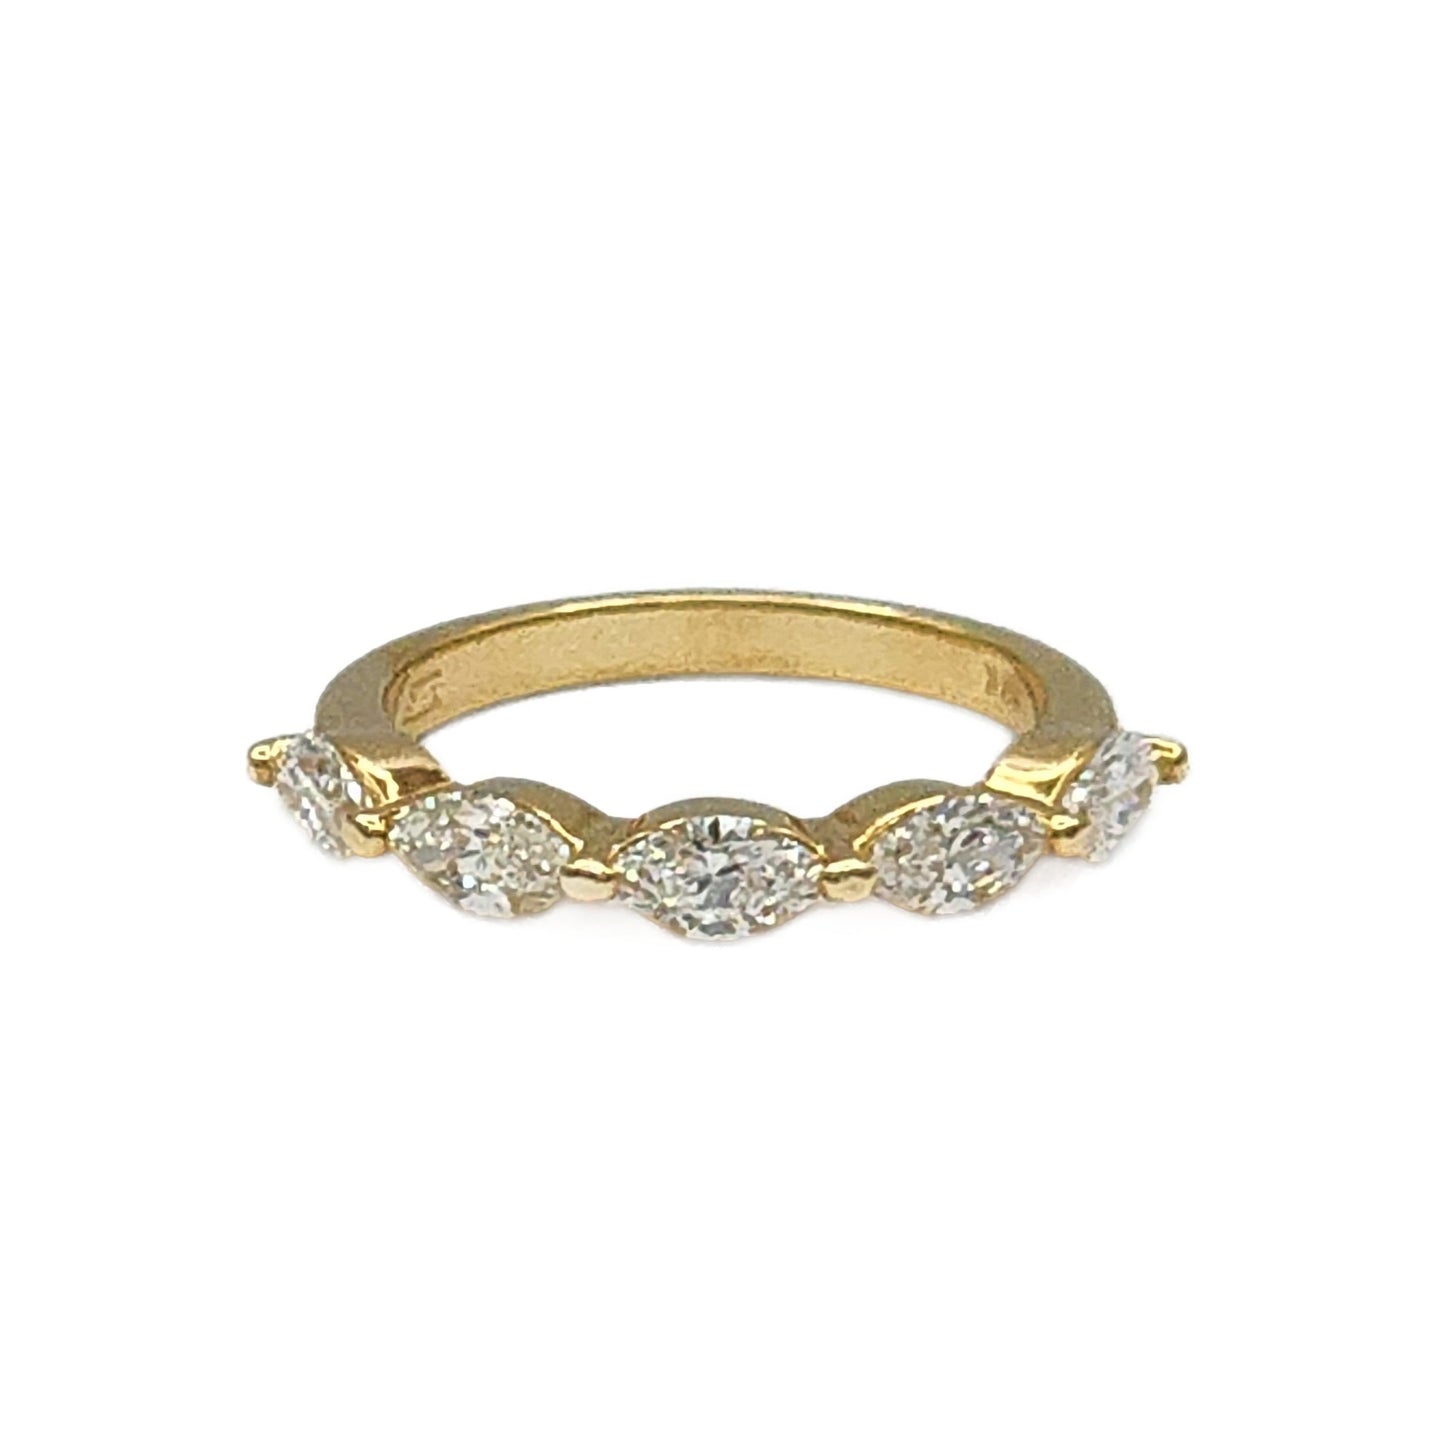 5=1.19 Carat Total Weight Marquise Diamond Band in 18K Yellow Gold